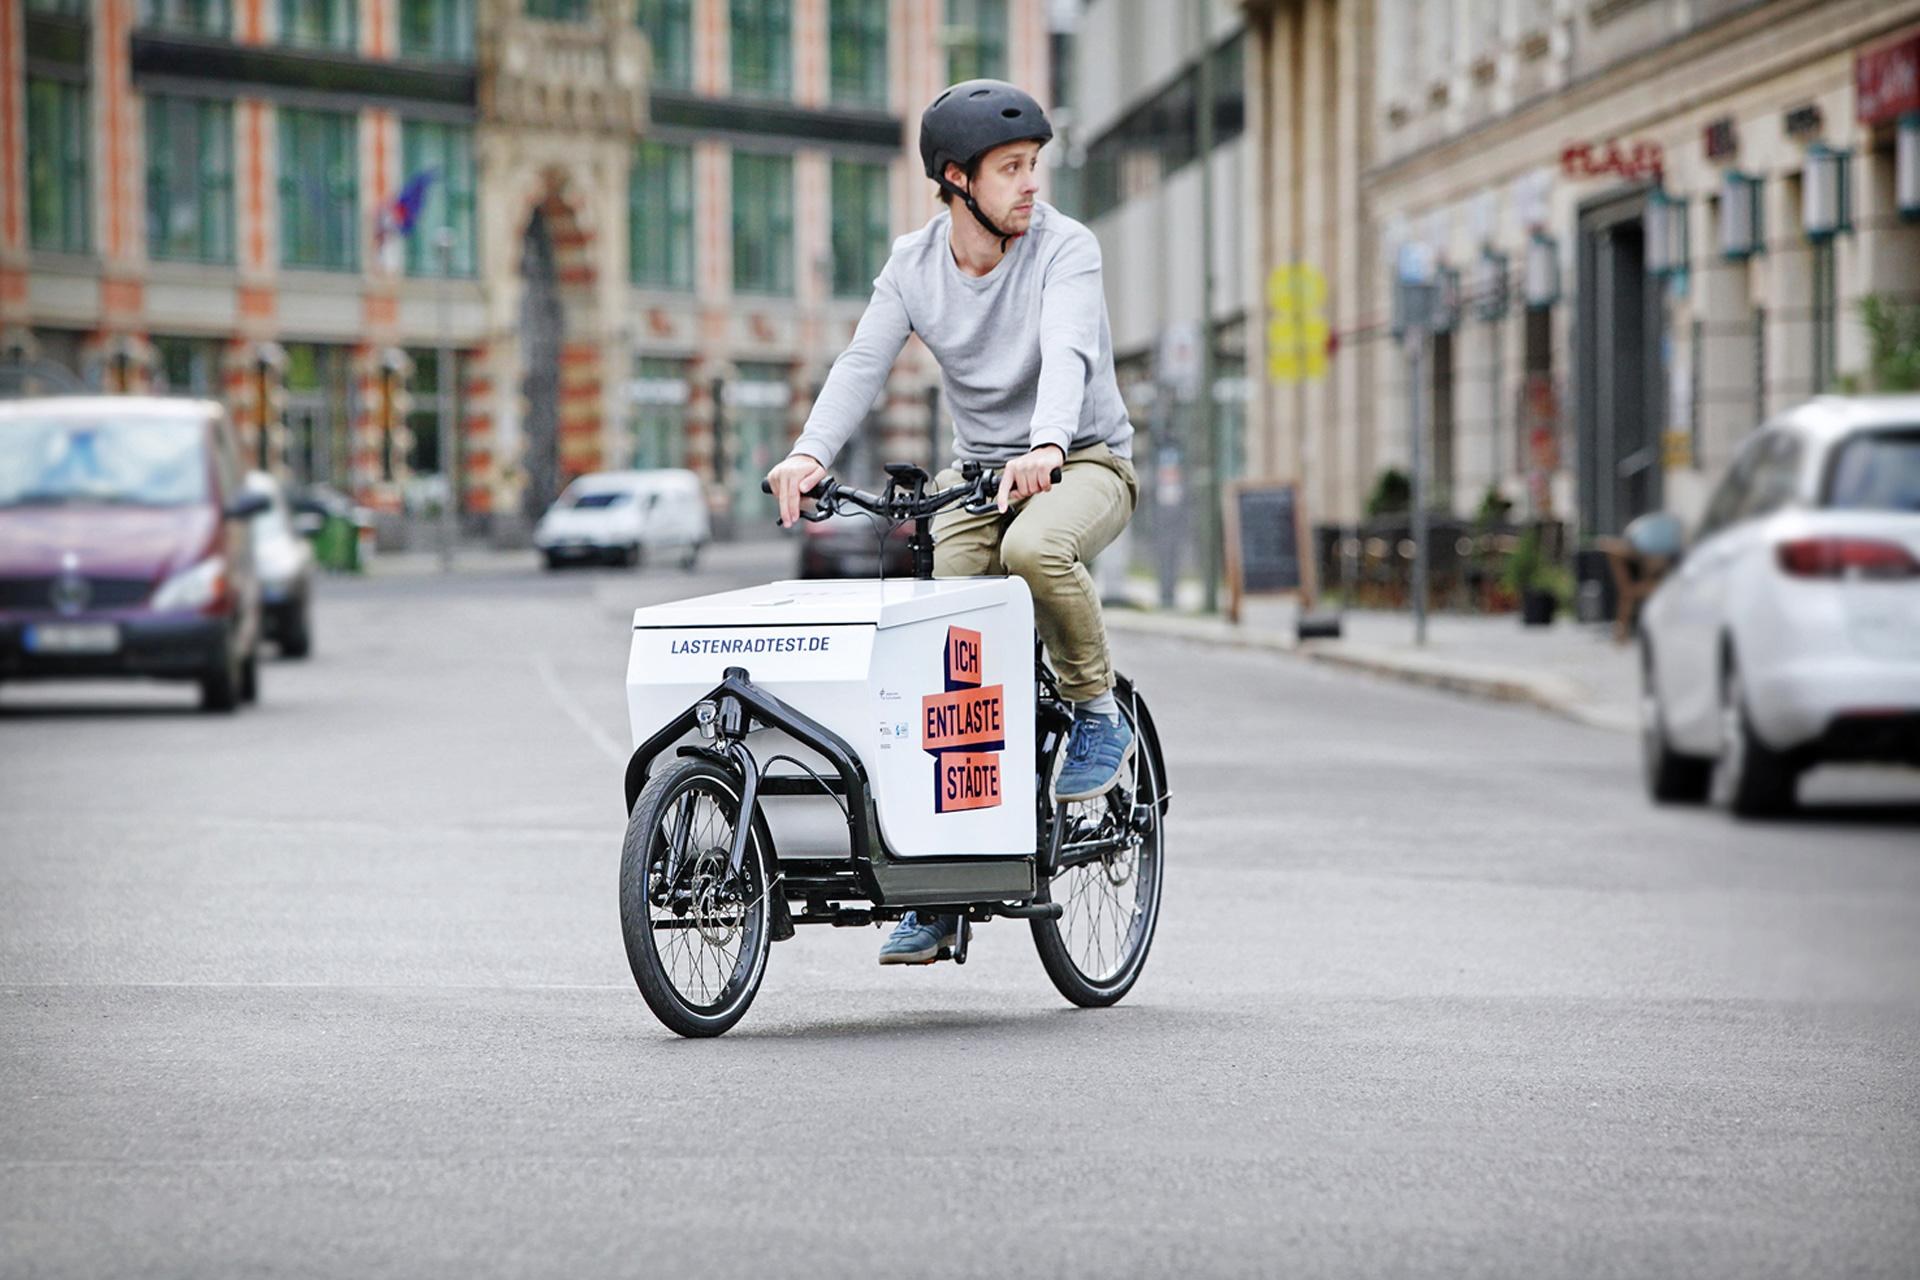 The cargo bike in action